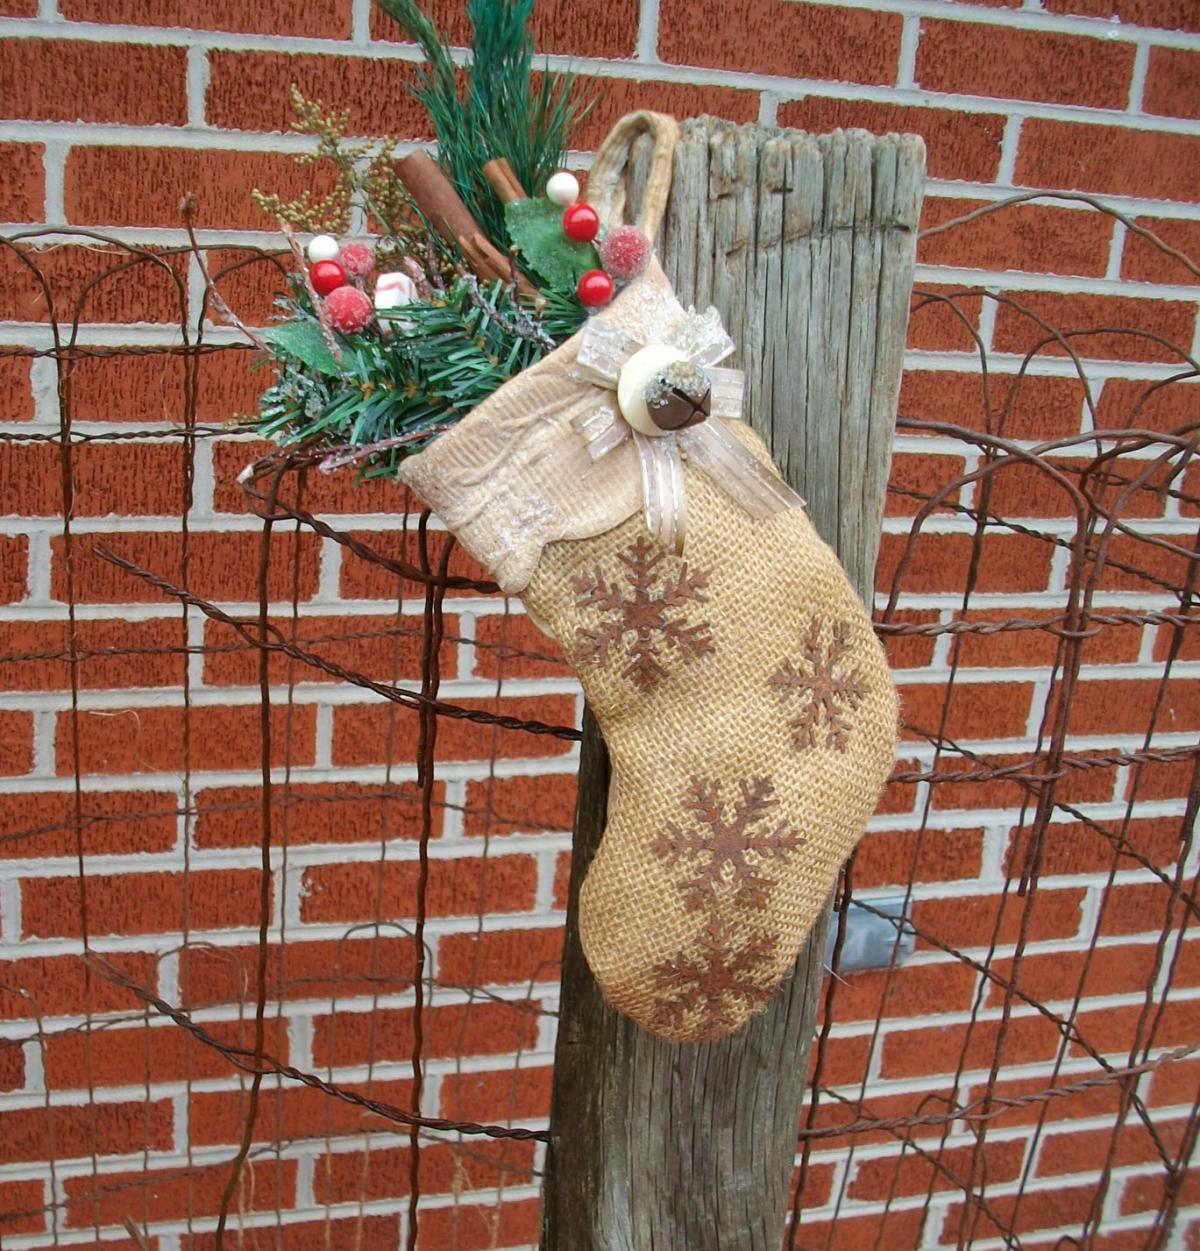 Rustic Christmas Stocking - Vintage Fabric, Preserved Greenery, Artificial Berries - Rusty Bell And Snowflakes